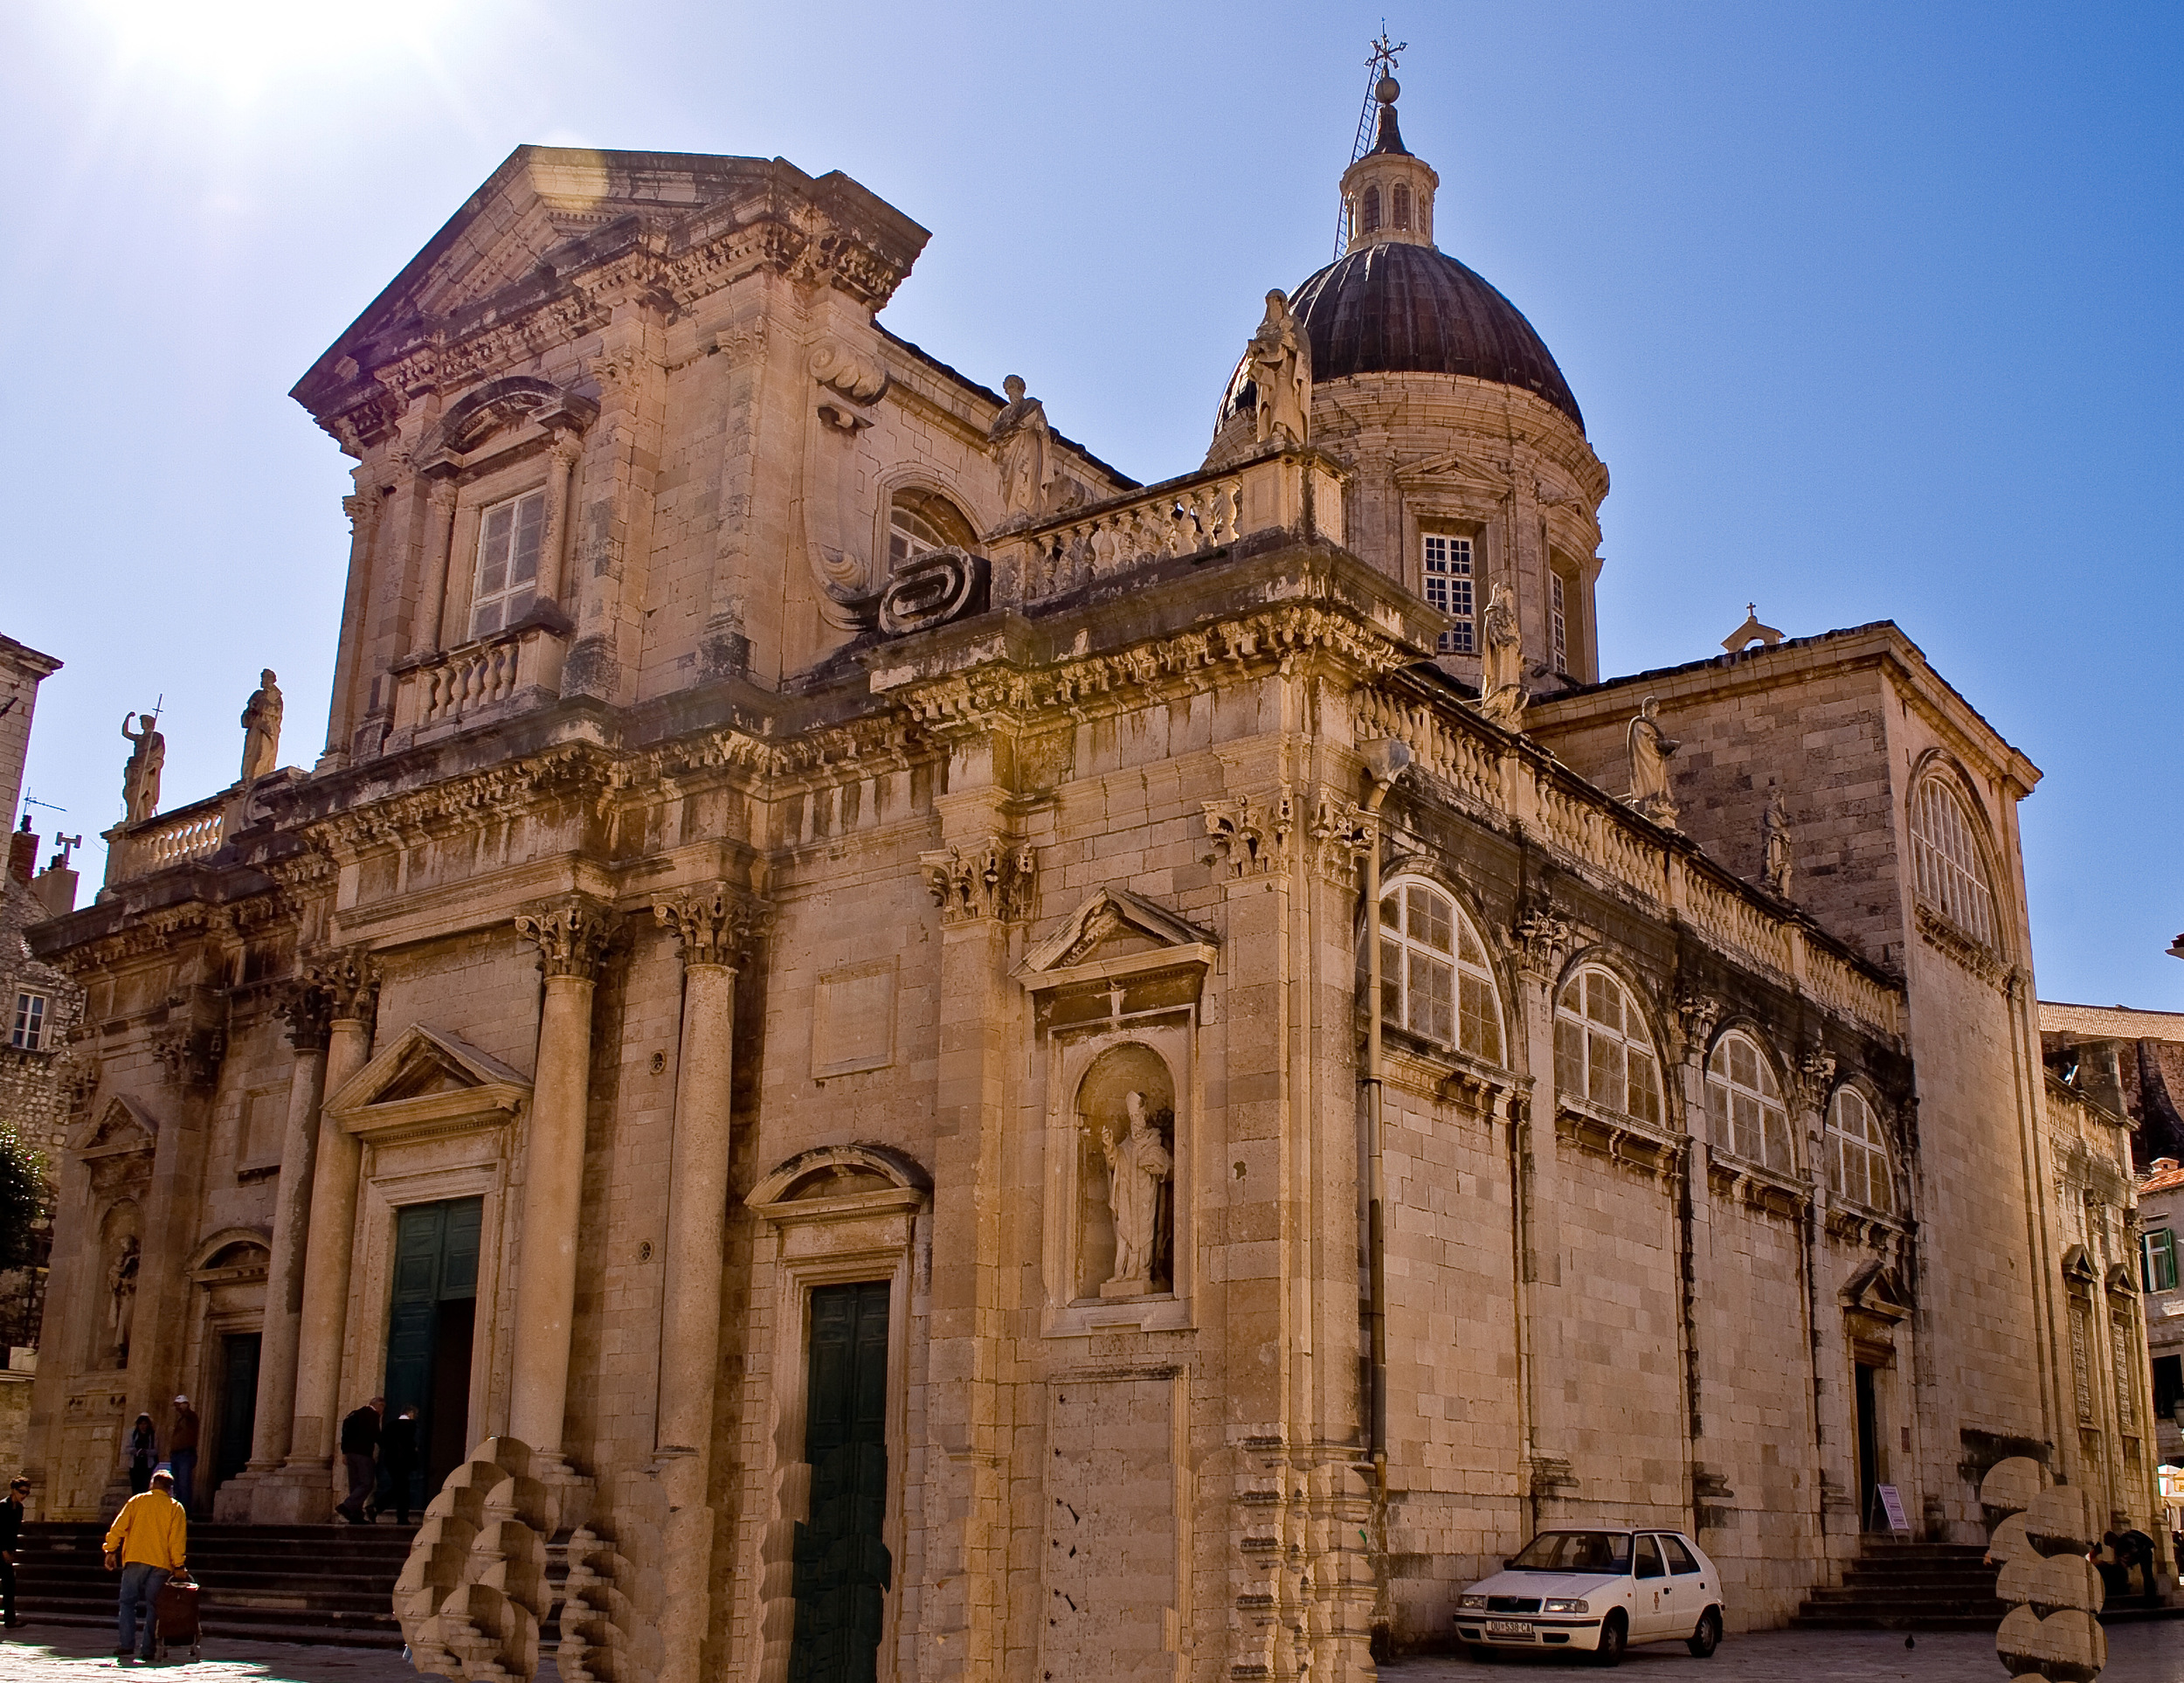 Dubrovnik_-_Cathedral_of_the_Assumption_of_the_Virgin_Mary_8166.jpg